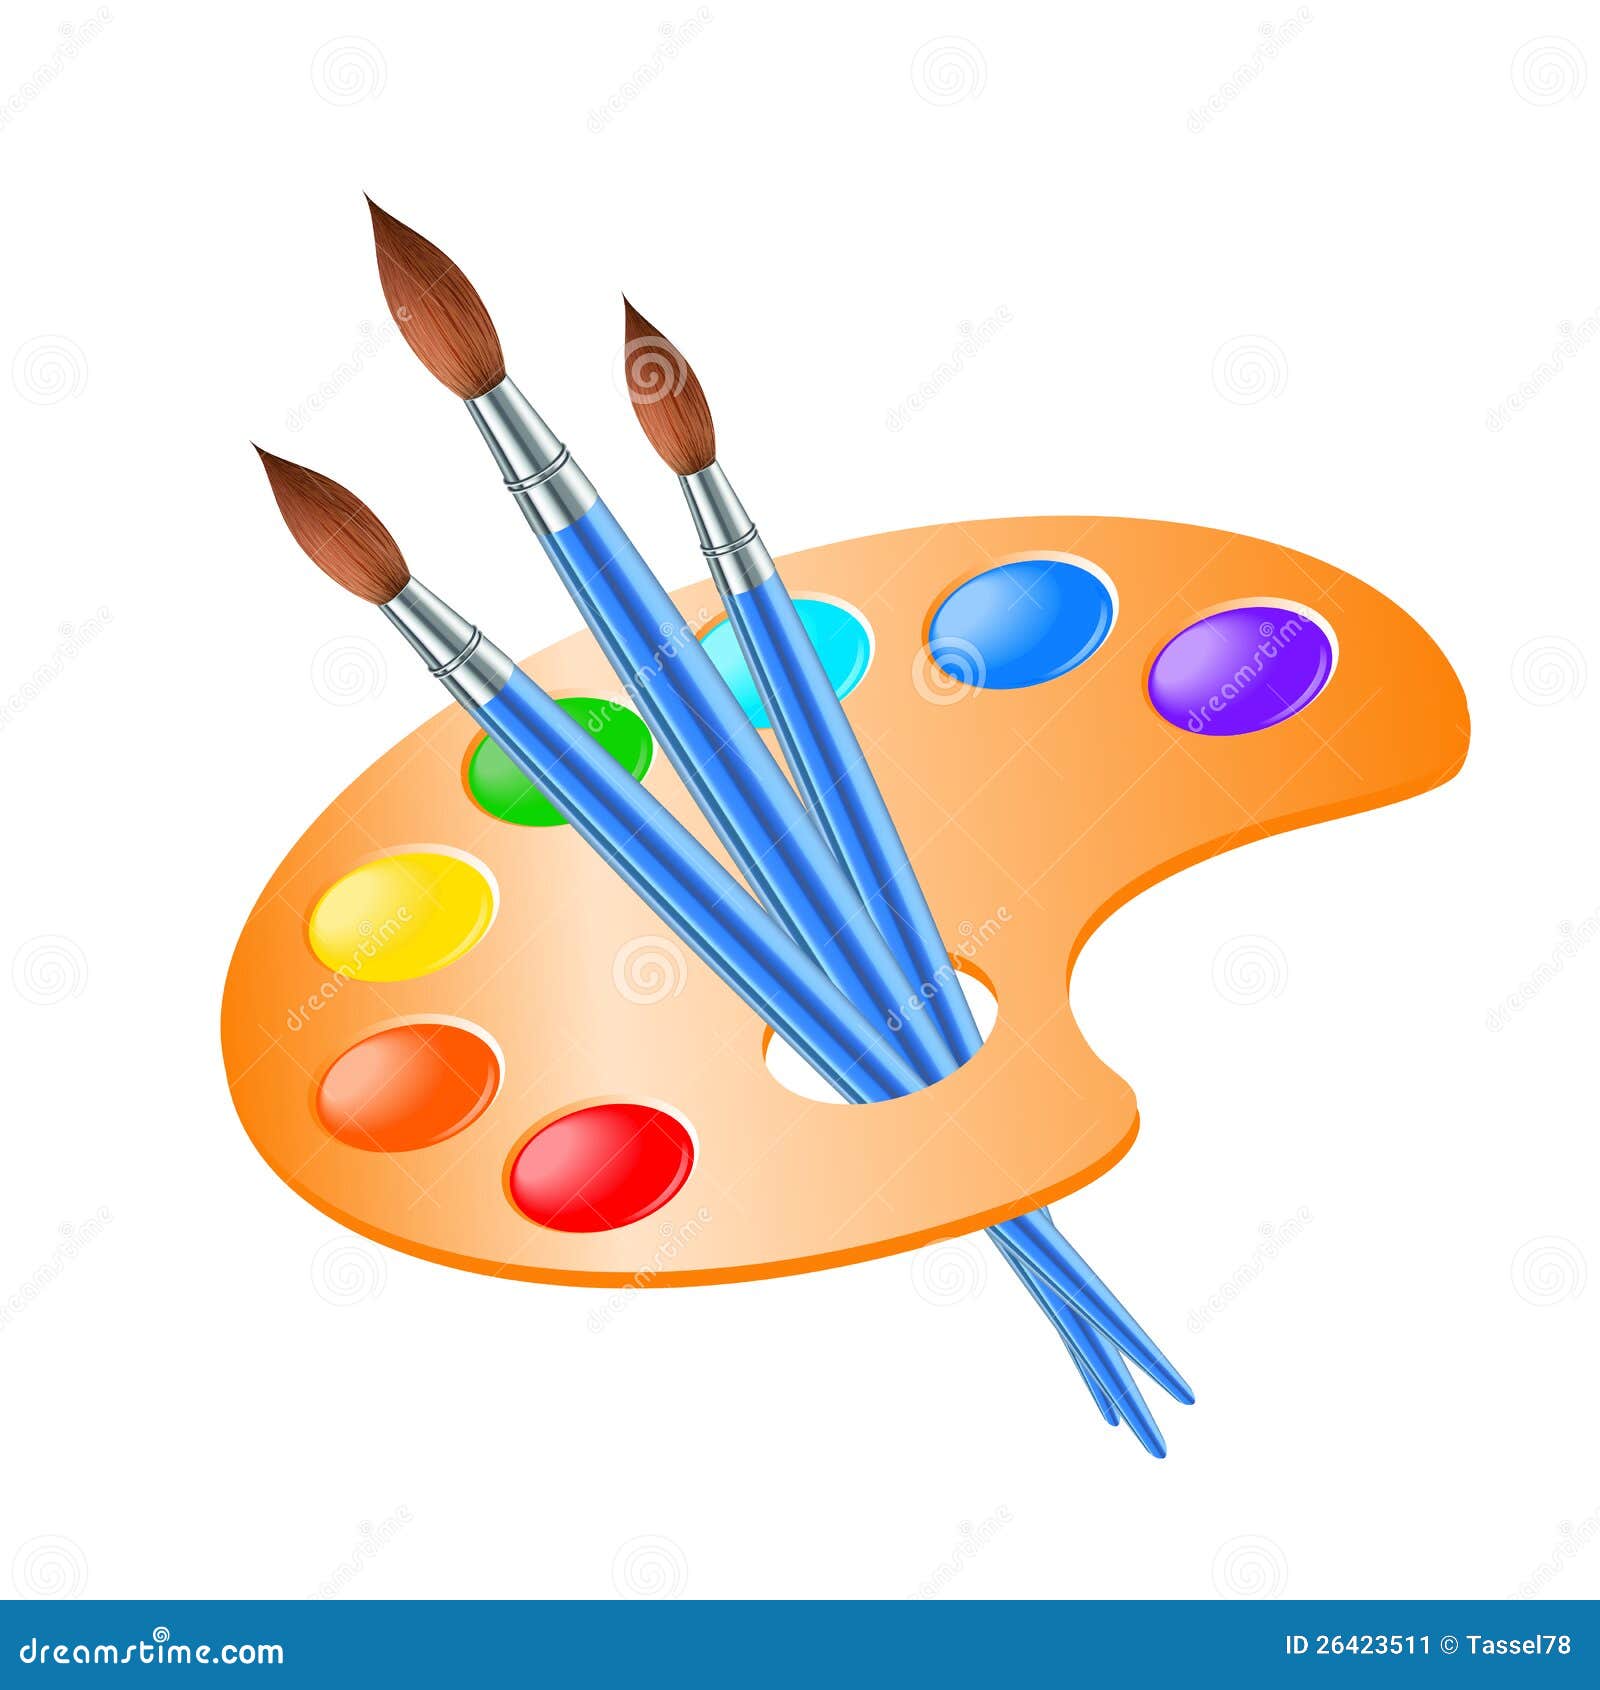 Brush And Palette Vector Art & Graphics